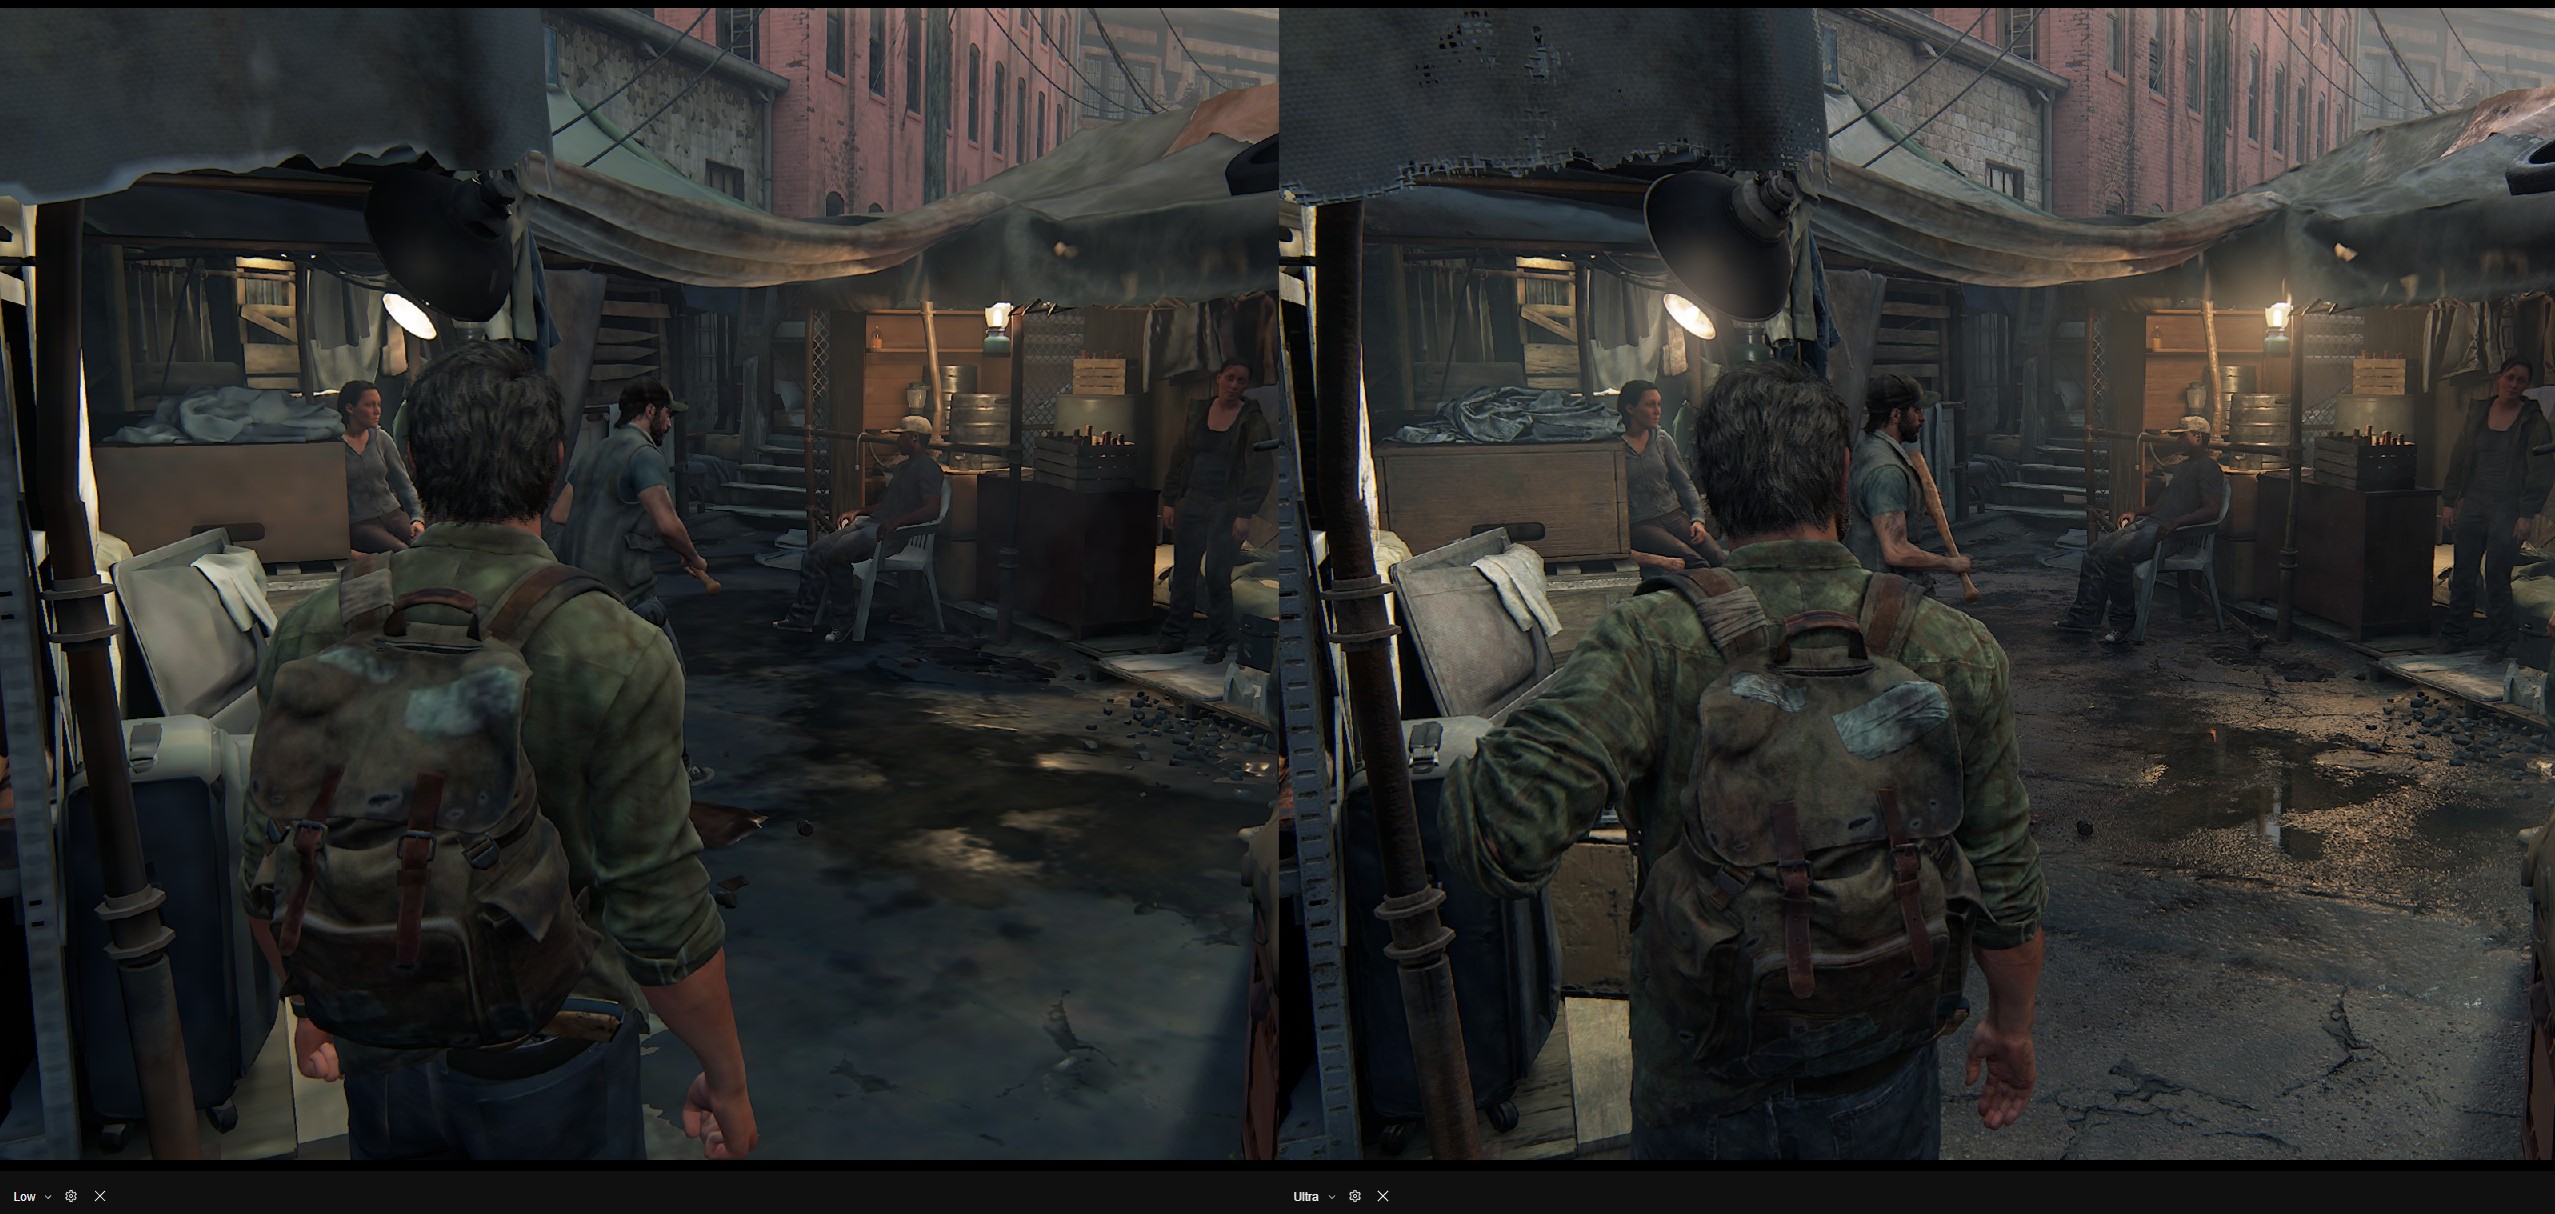 Game Review: The Last of Us Part 1's PC port is far from perfect